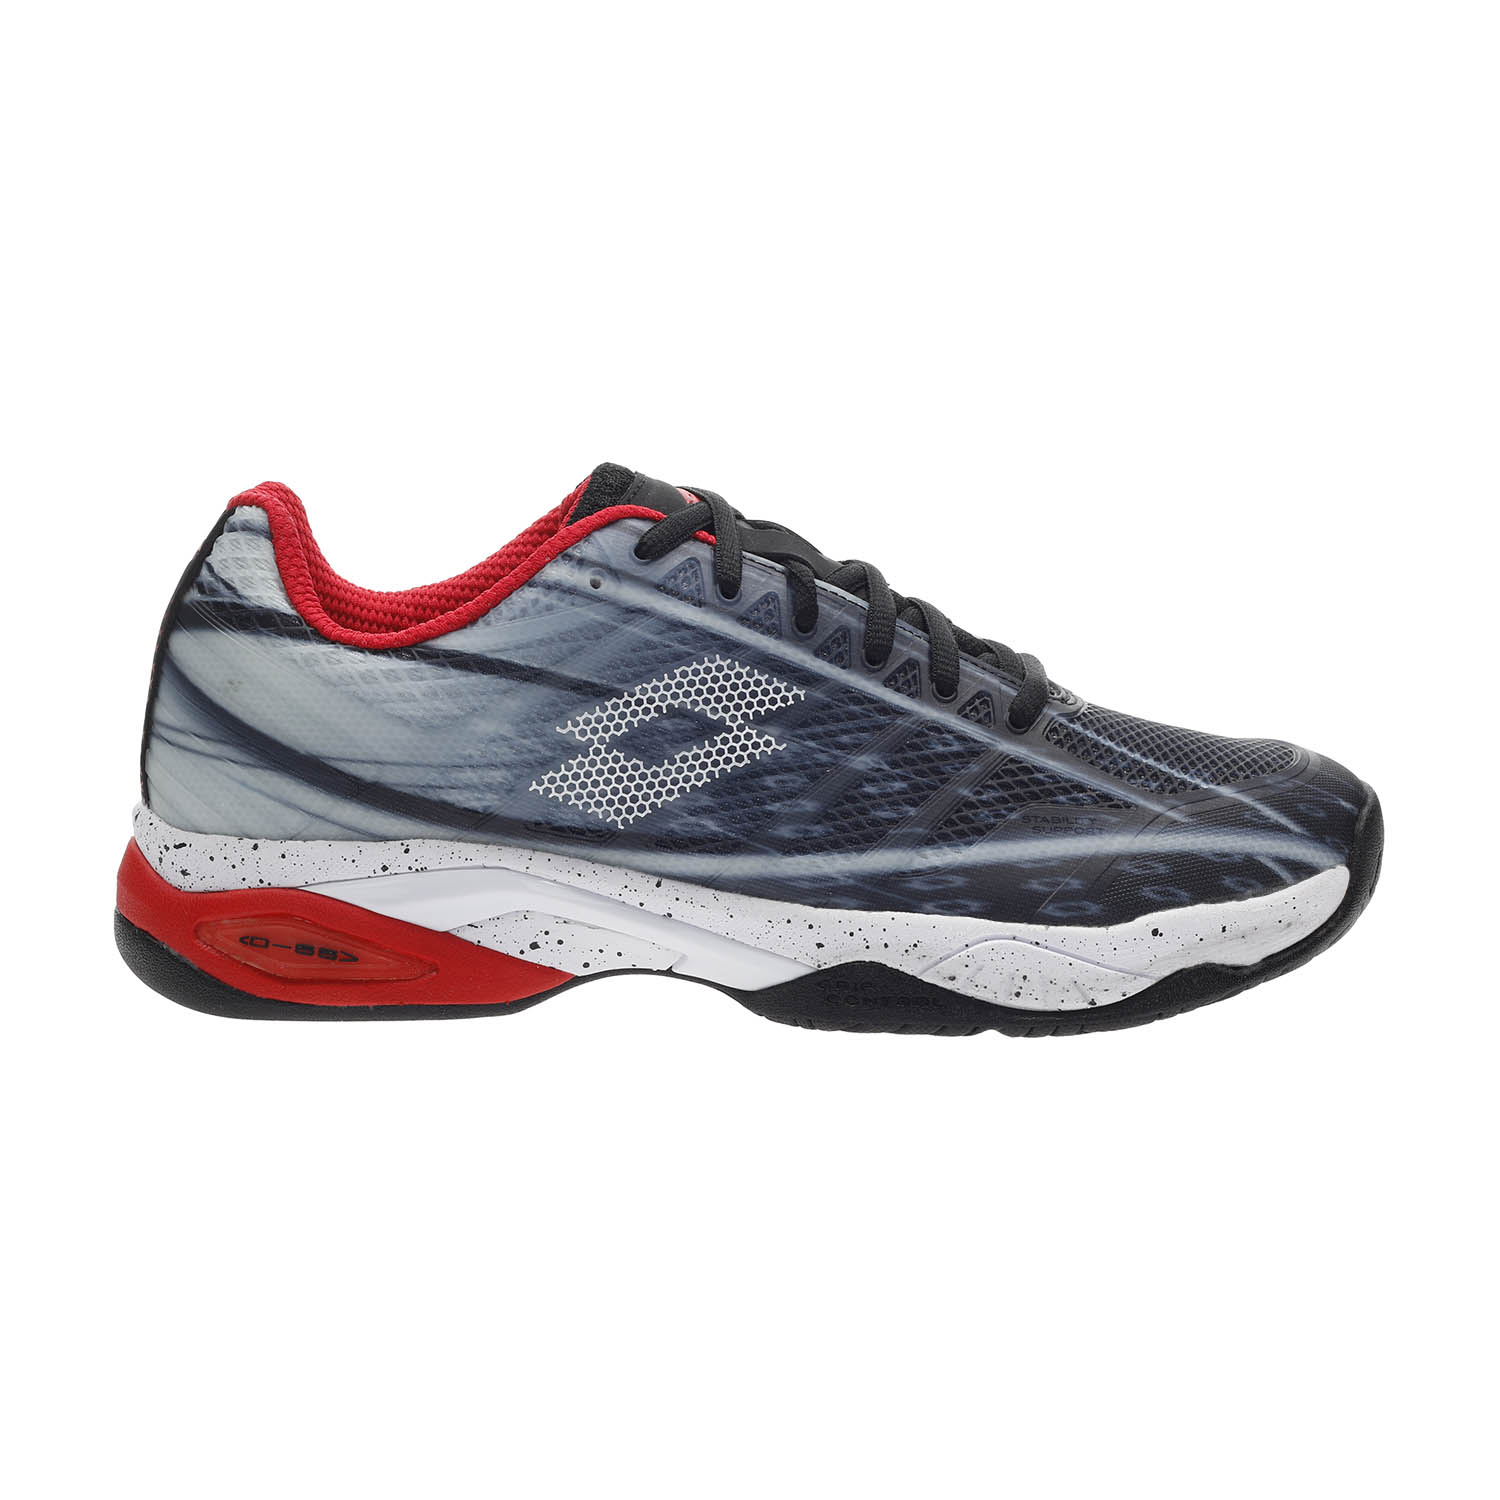 lotto tennis shoes mens